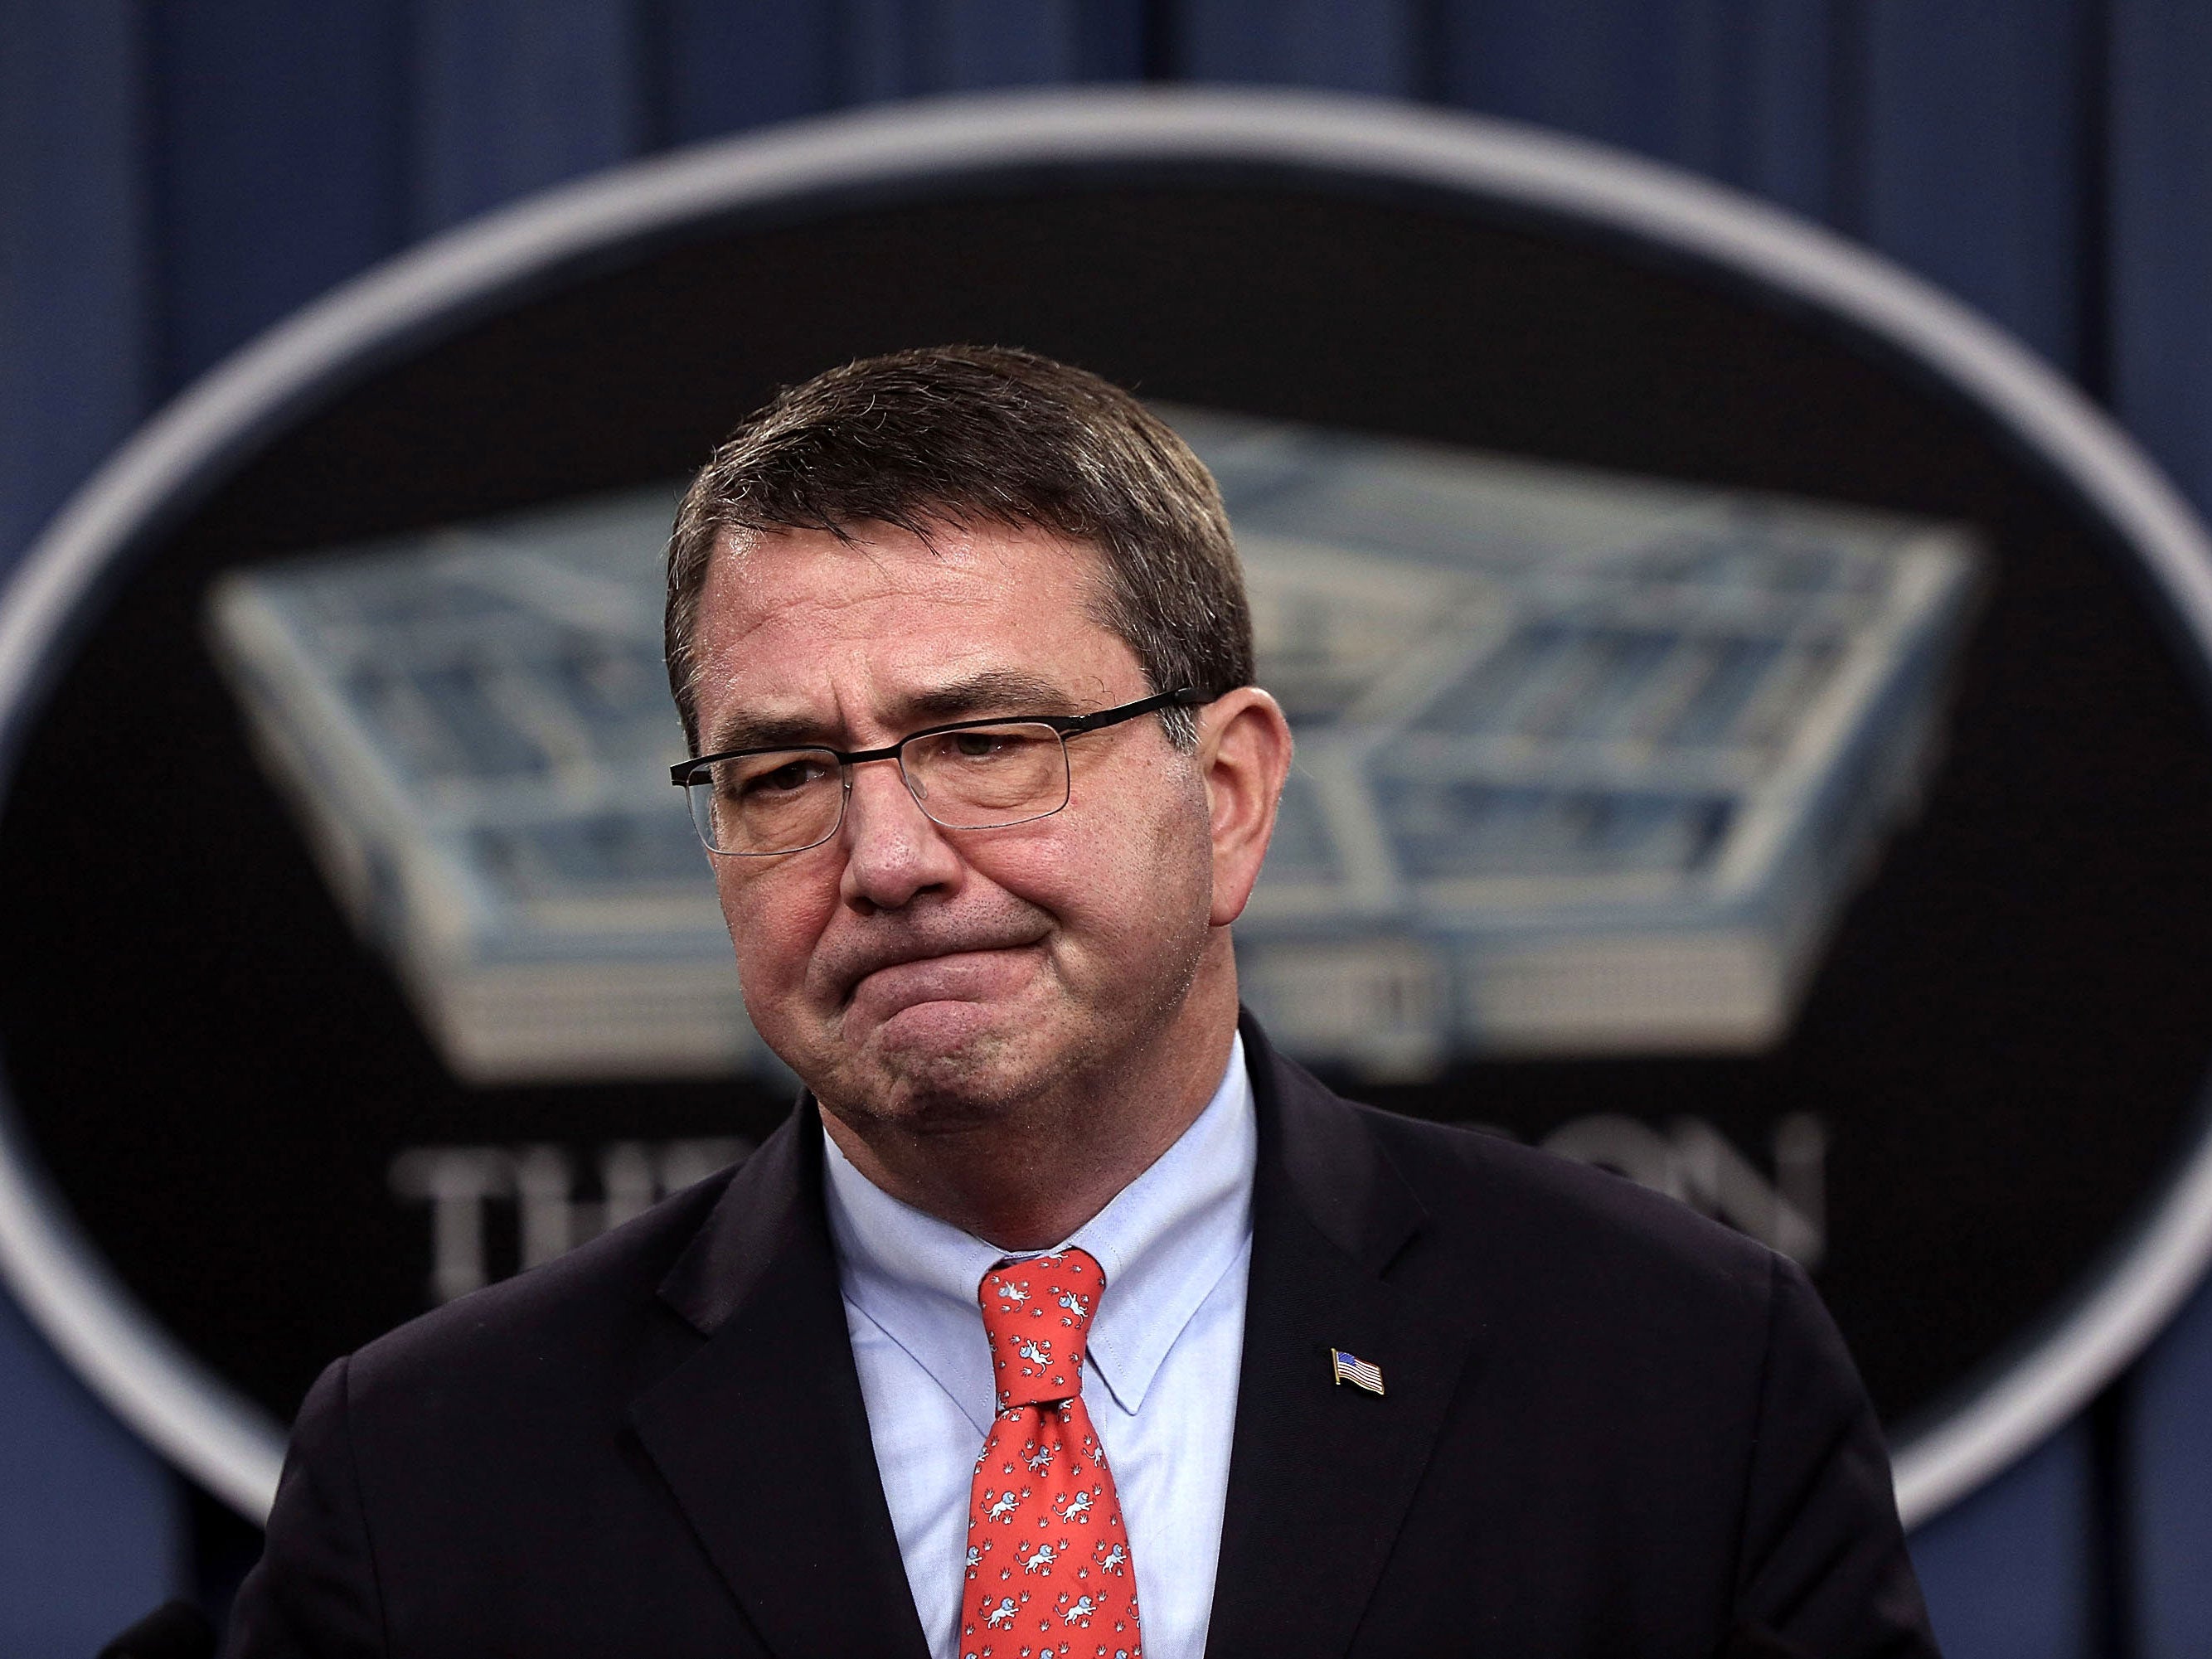 Ash Carter, US Defence Secretary has said that the Iraqi military showed "no will to fight" against Isis